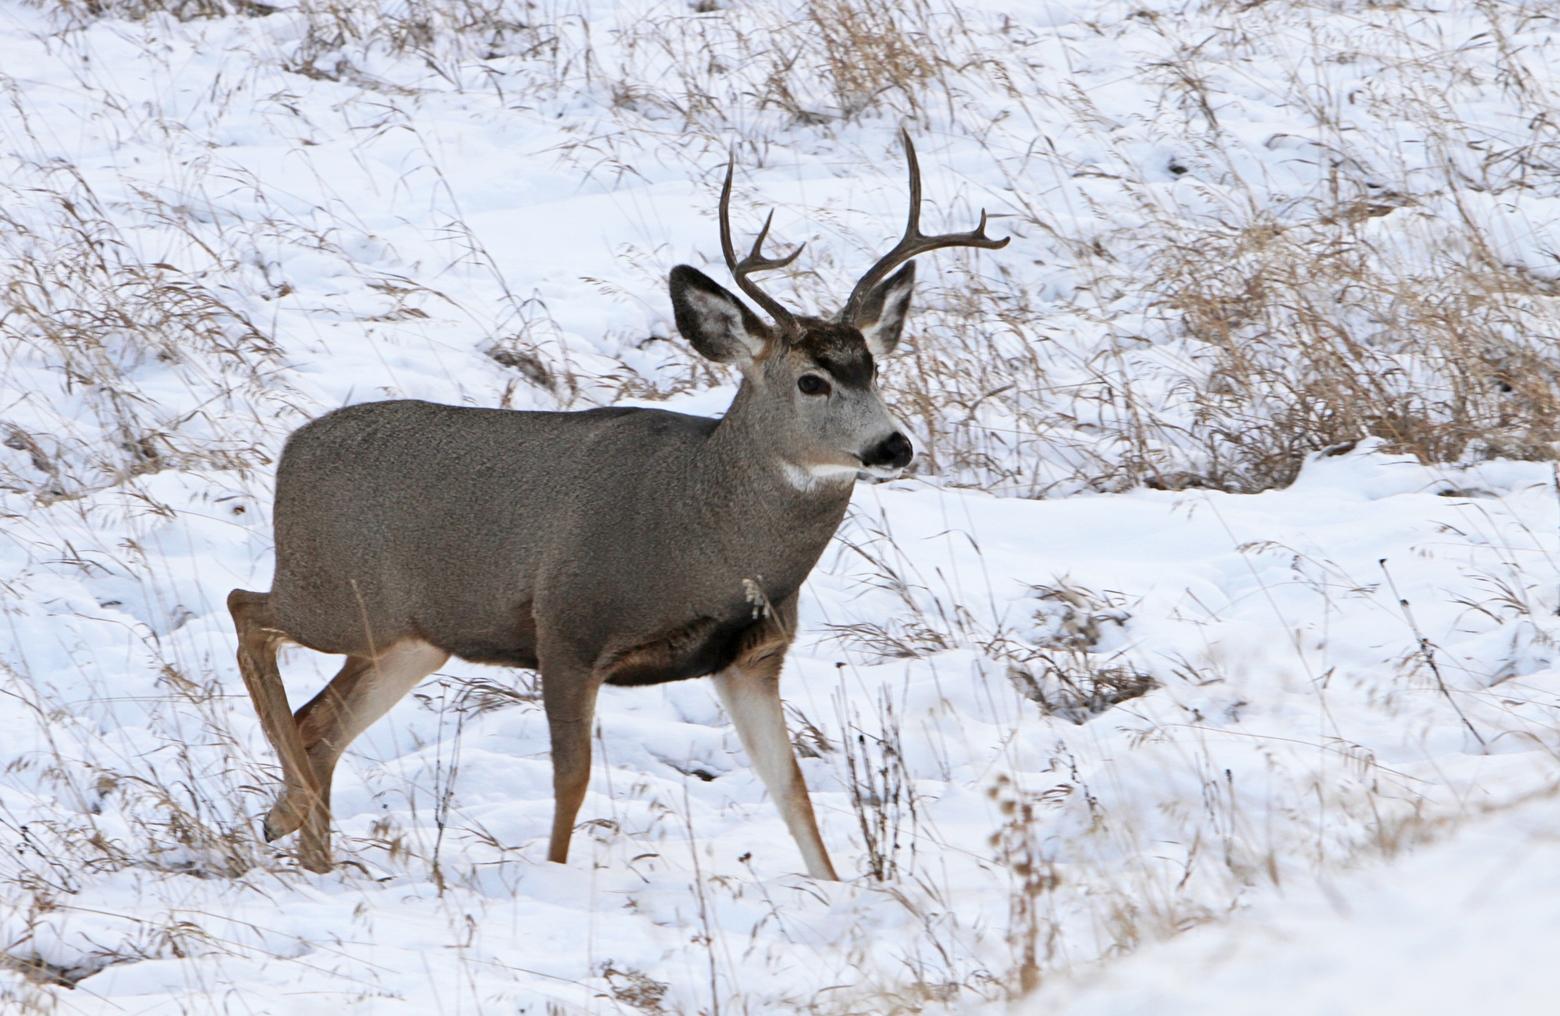 A mule deer found near Yellowstone Lake is the first confirmed case of chronic wasting disease ever in Yellowstone National Park. The disease, also known as CWD, is always deadly to the cervids it infects, and experts have said it was "only a matter of time" before it was discovered in Yellowstone. Photo by Jim Peaco/NPS